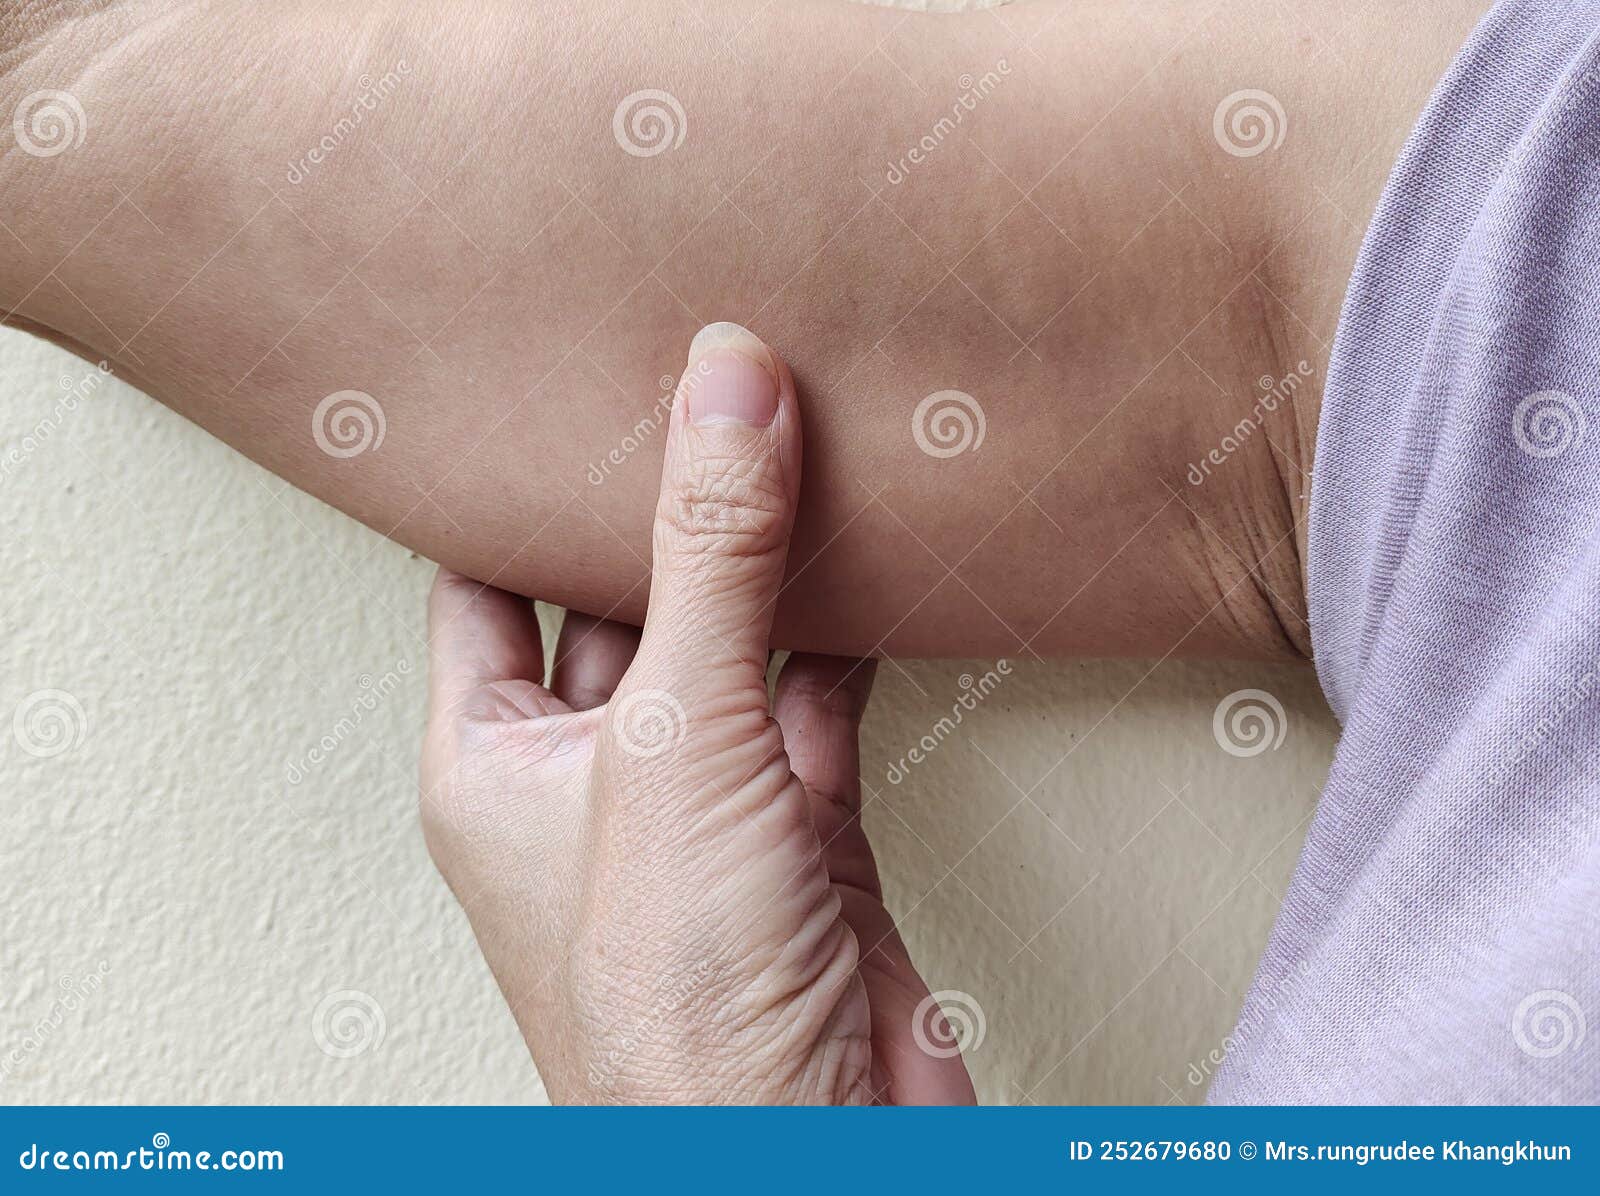 330+ Skin Condition Armpit Stock Photos, Pictures & Royalty-Free